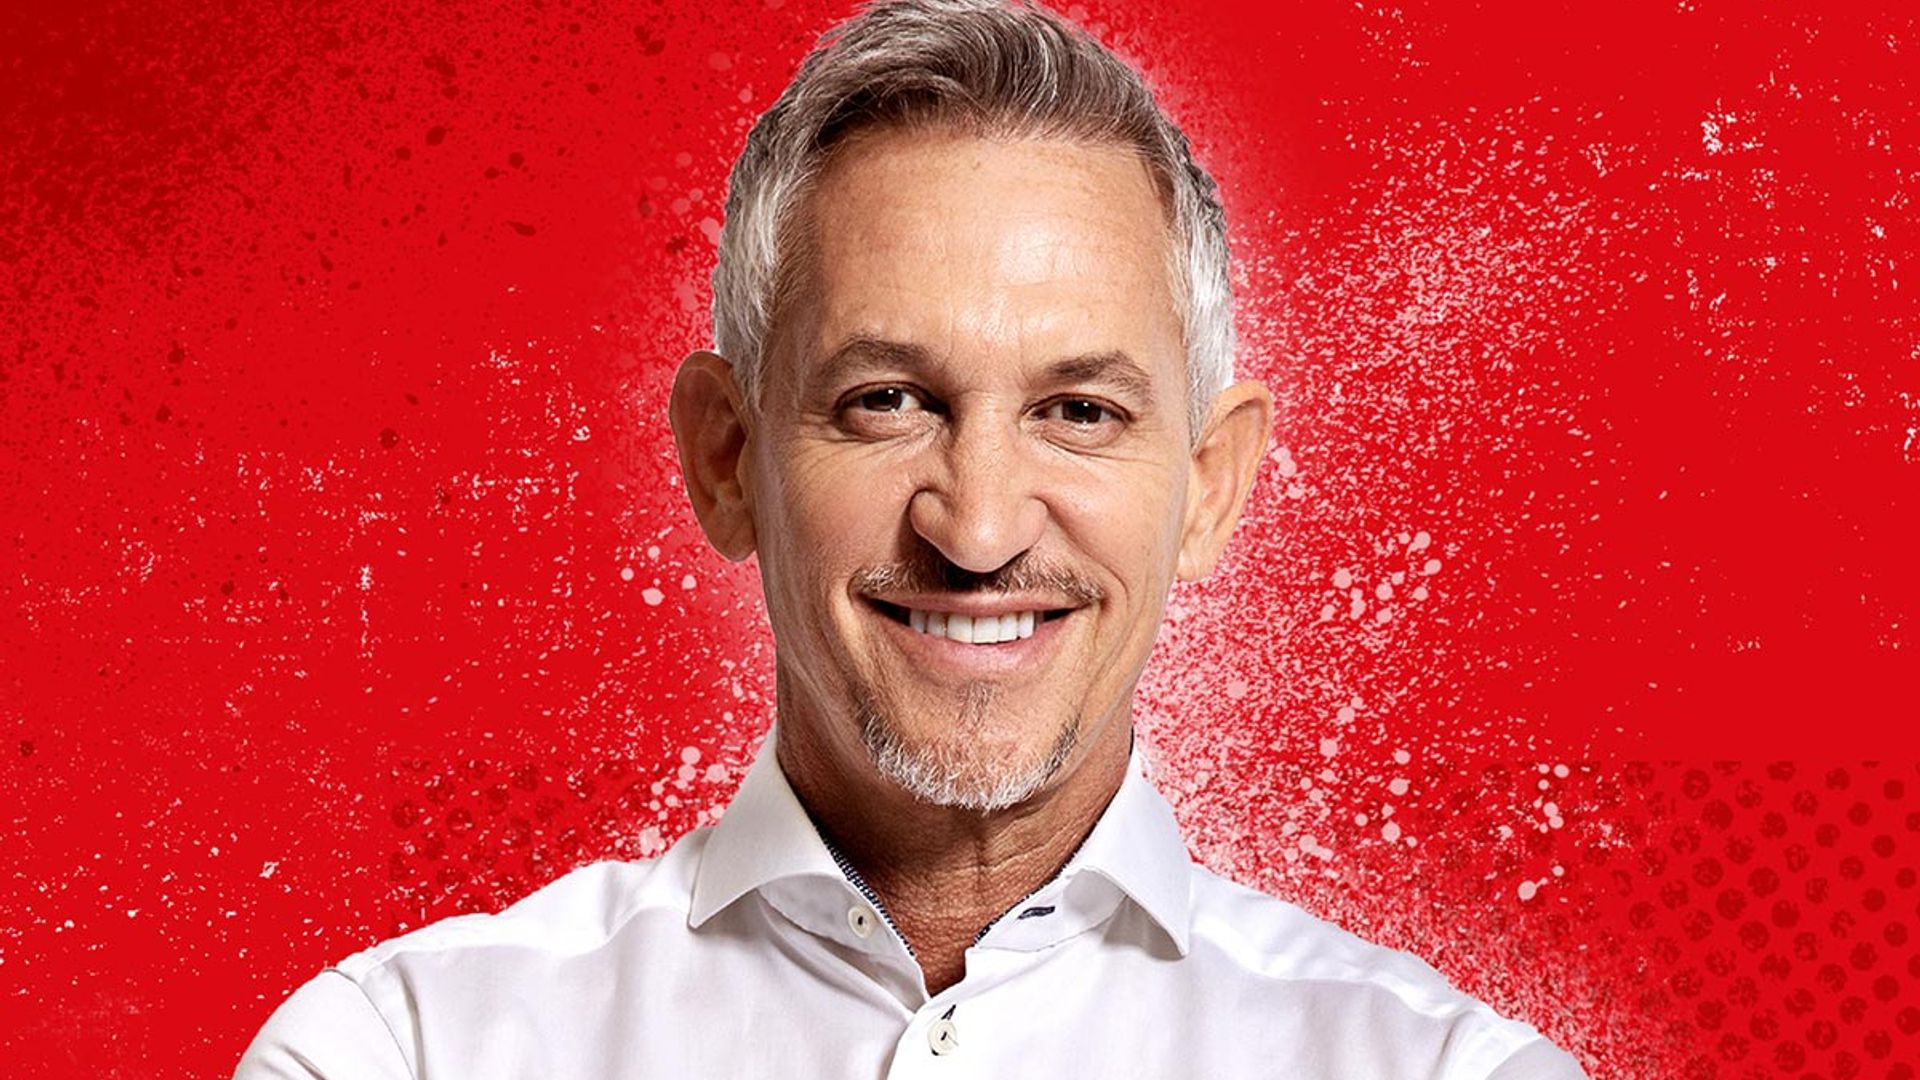 Everything you need to know about Gary Lineker – from family to Twitter controversies